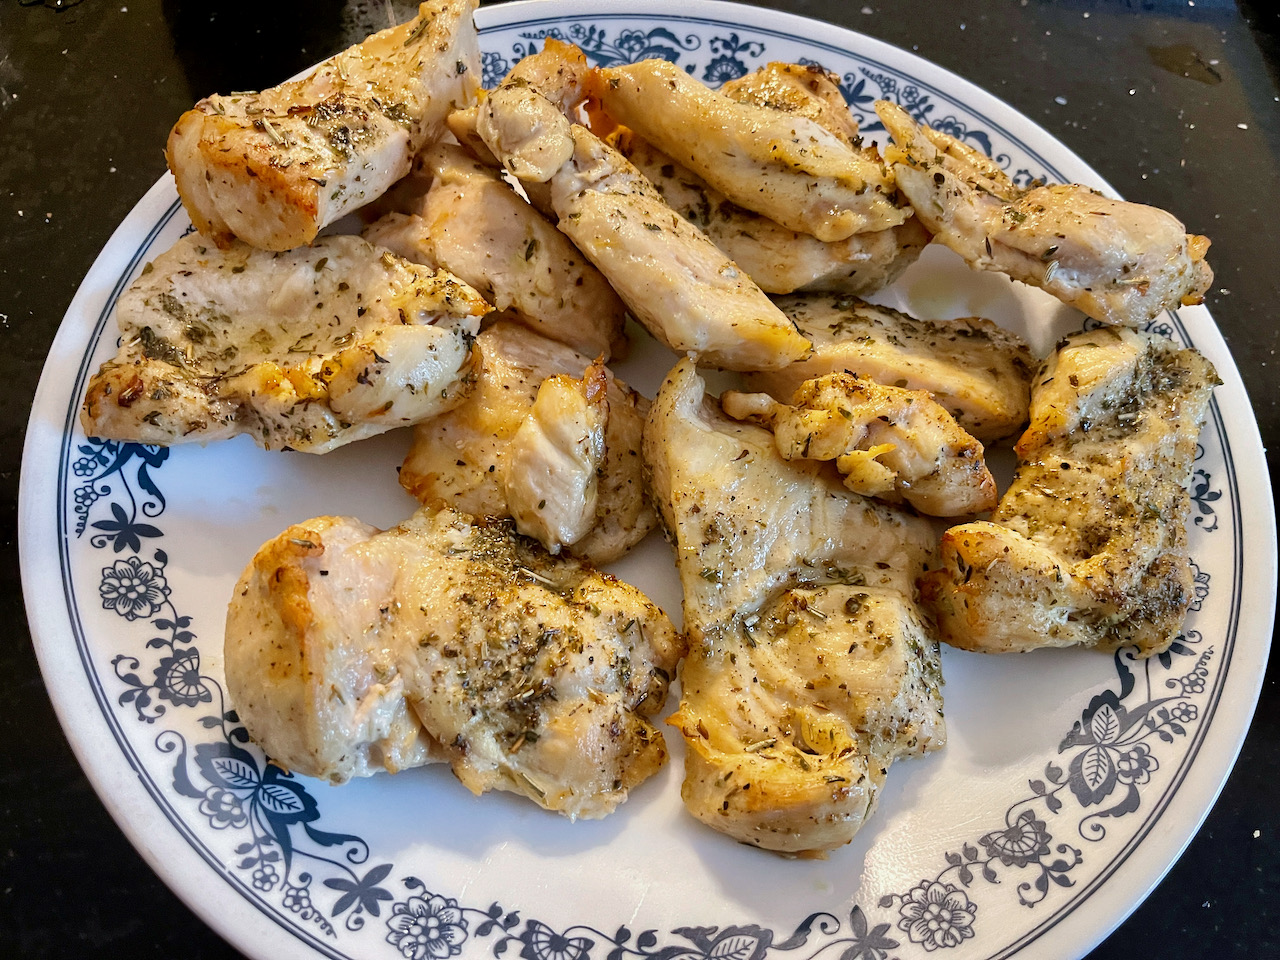 https://www.themamamaven.com/wp-content/uploads/2021/07/finished-air-fryer-grilled-chicken.jpeg